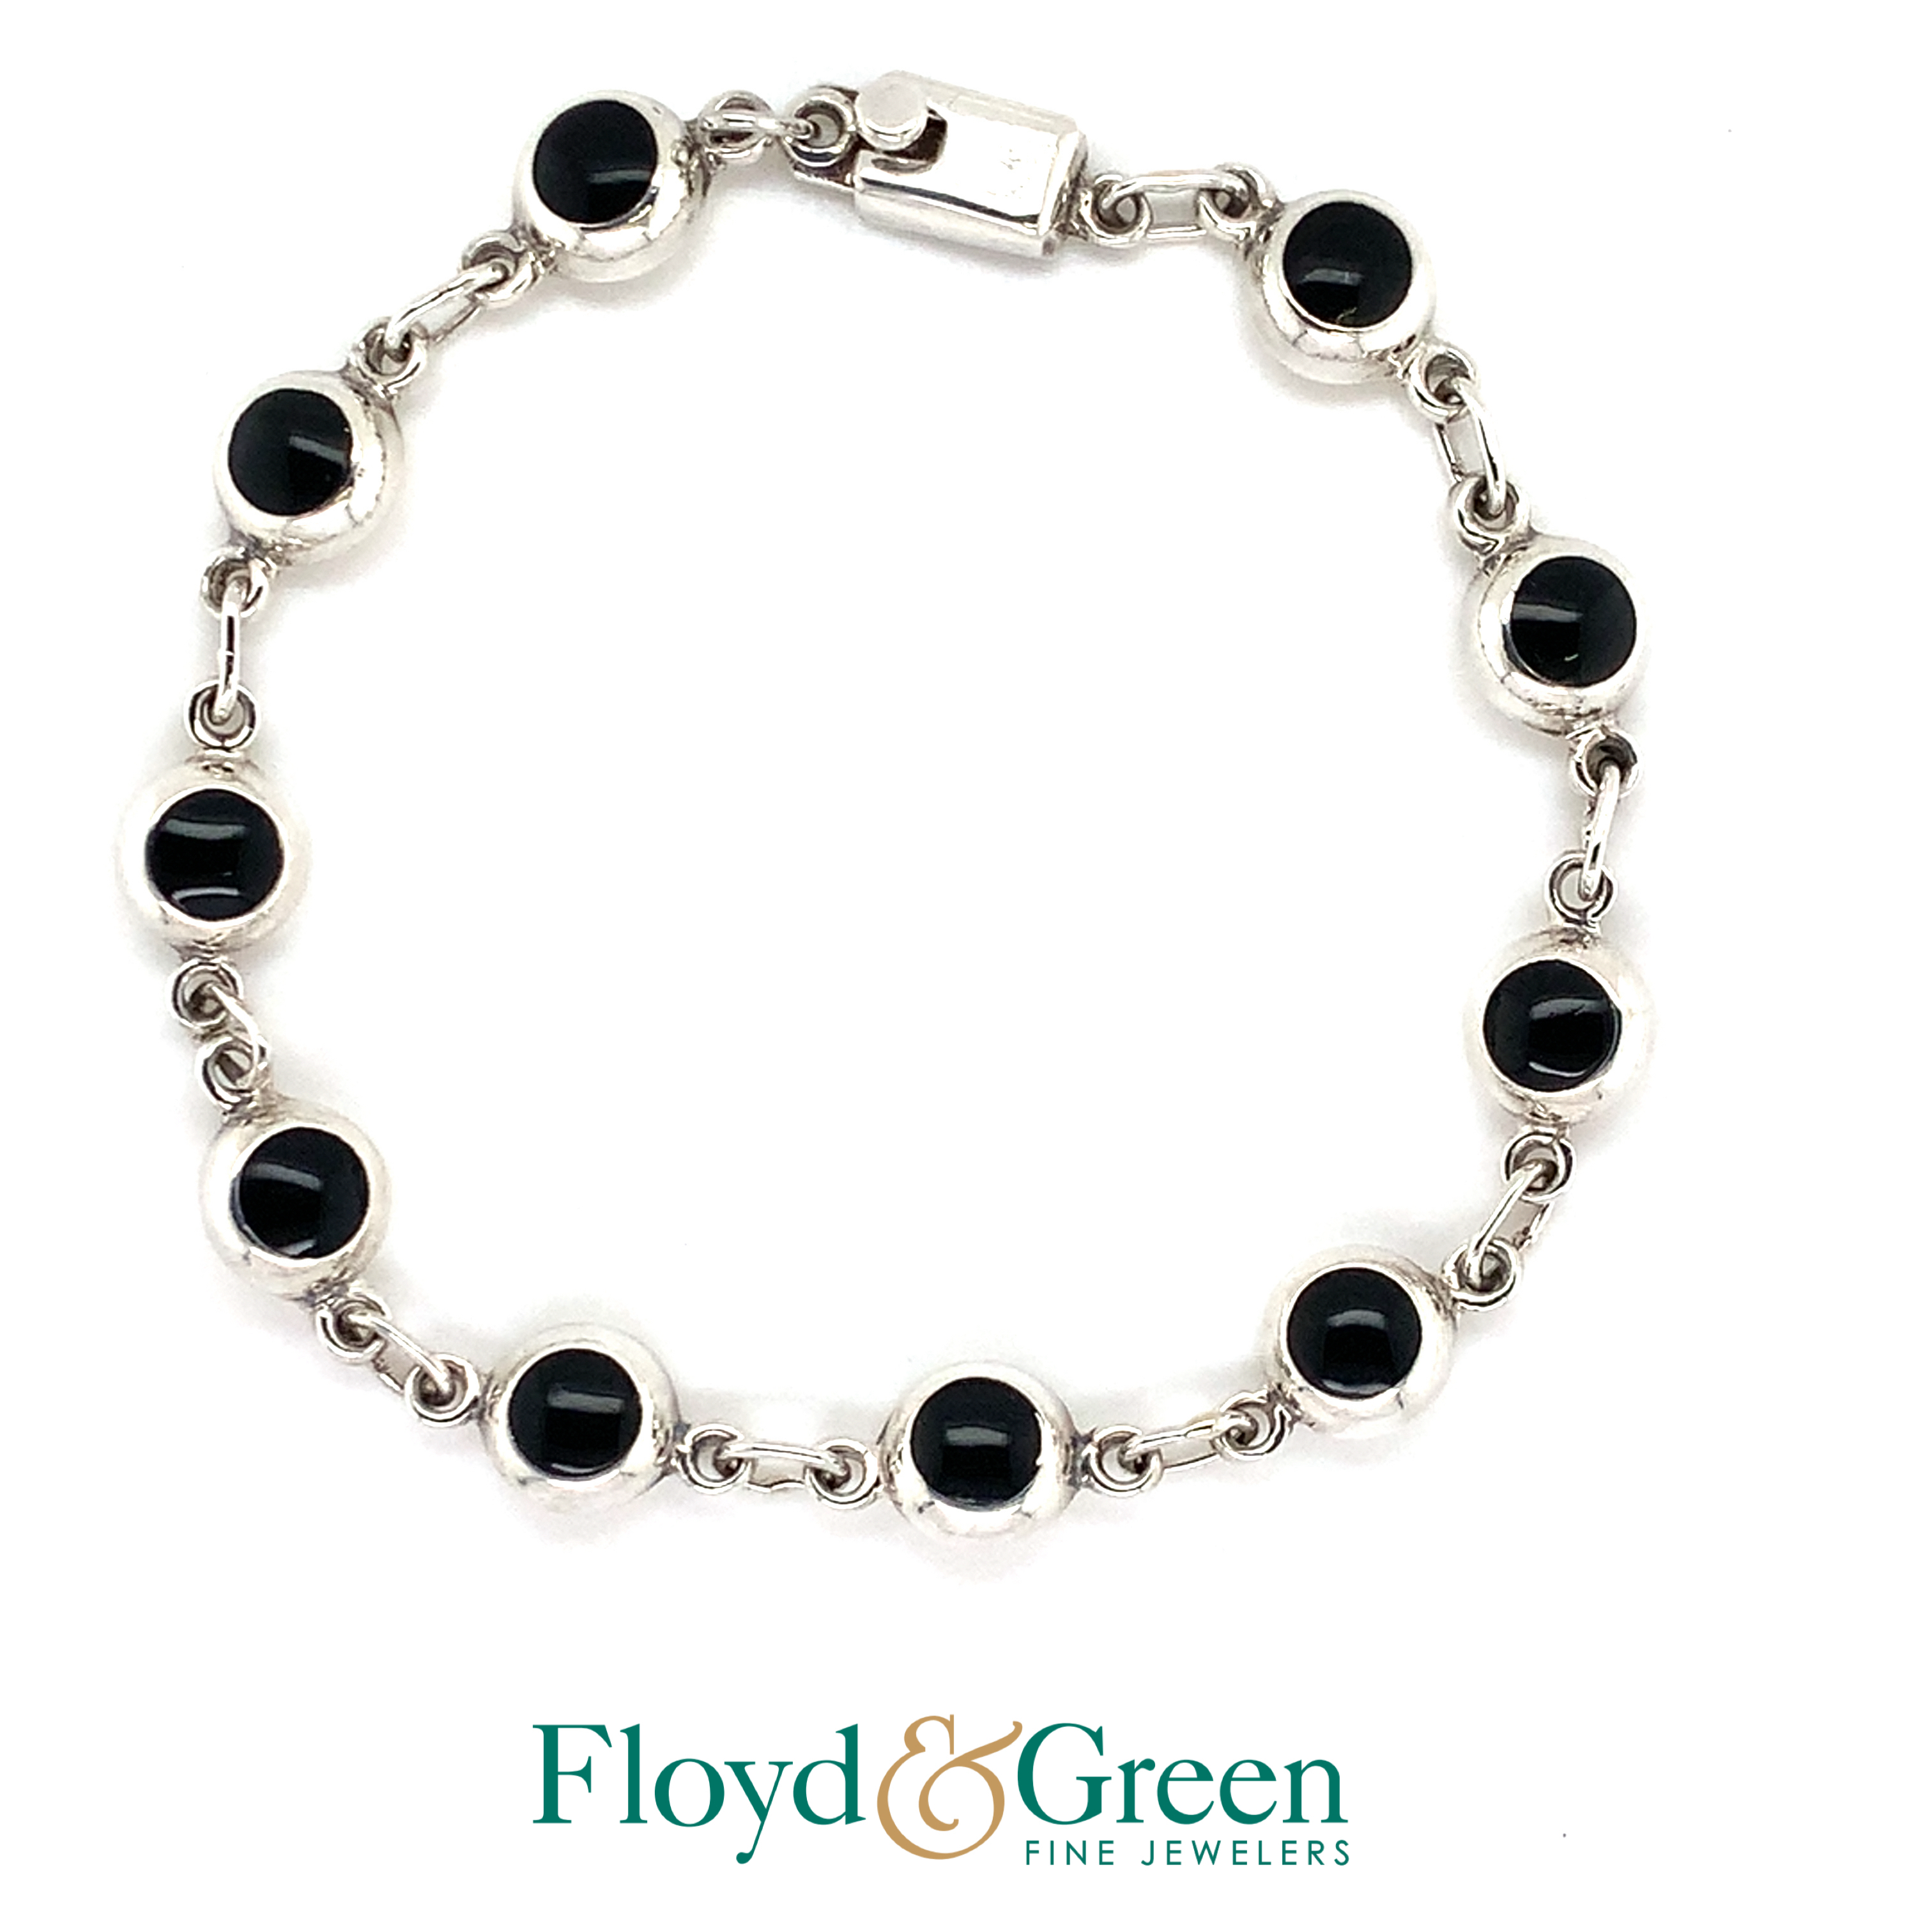 Sterling Silver Bracelet with Black Glass Stones, 7 inch, 9.6g